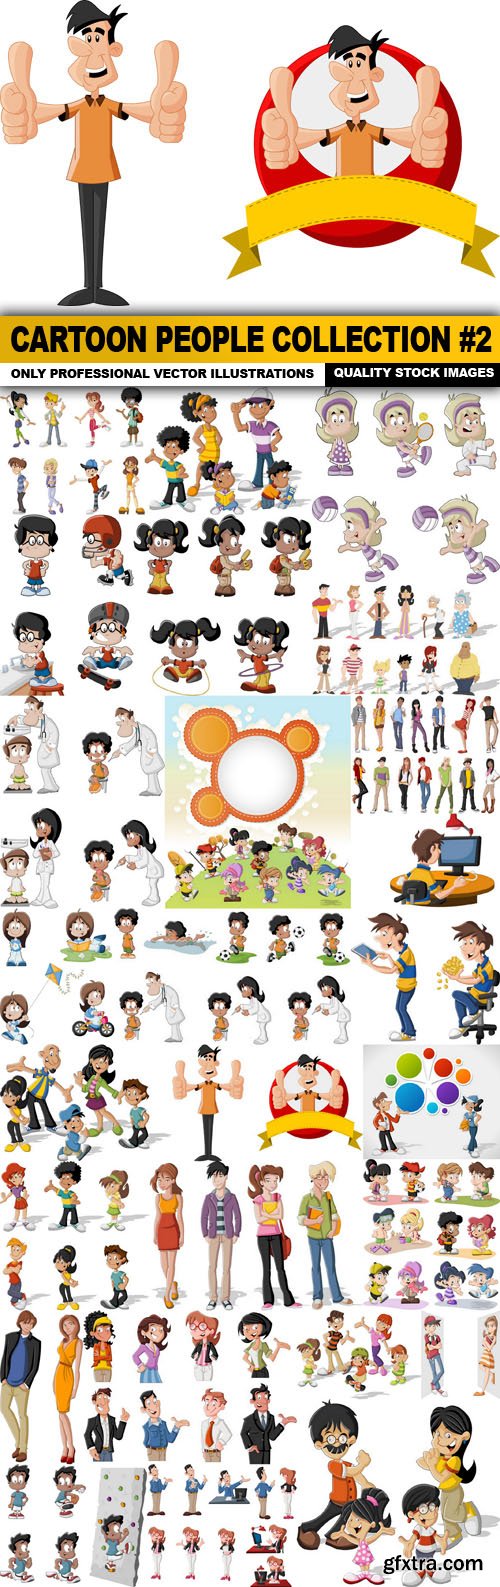 Cartoon People Collection #2 - 25 Vector